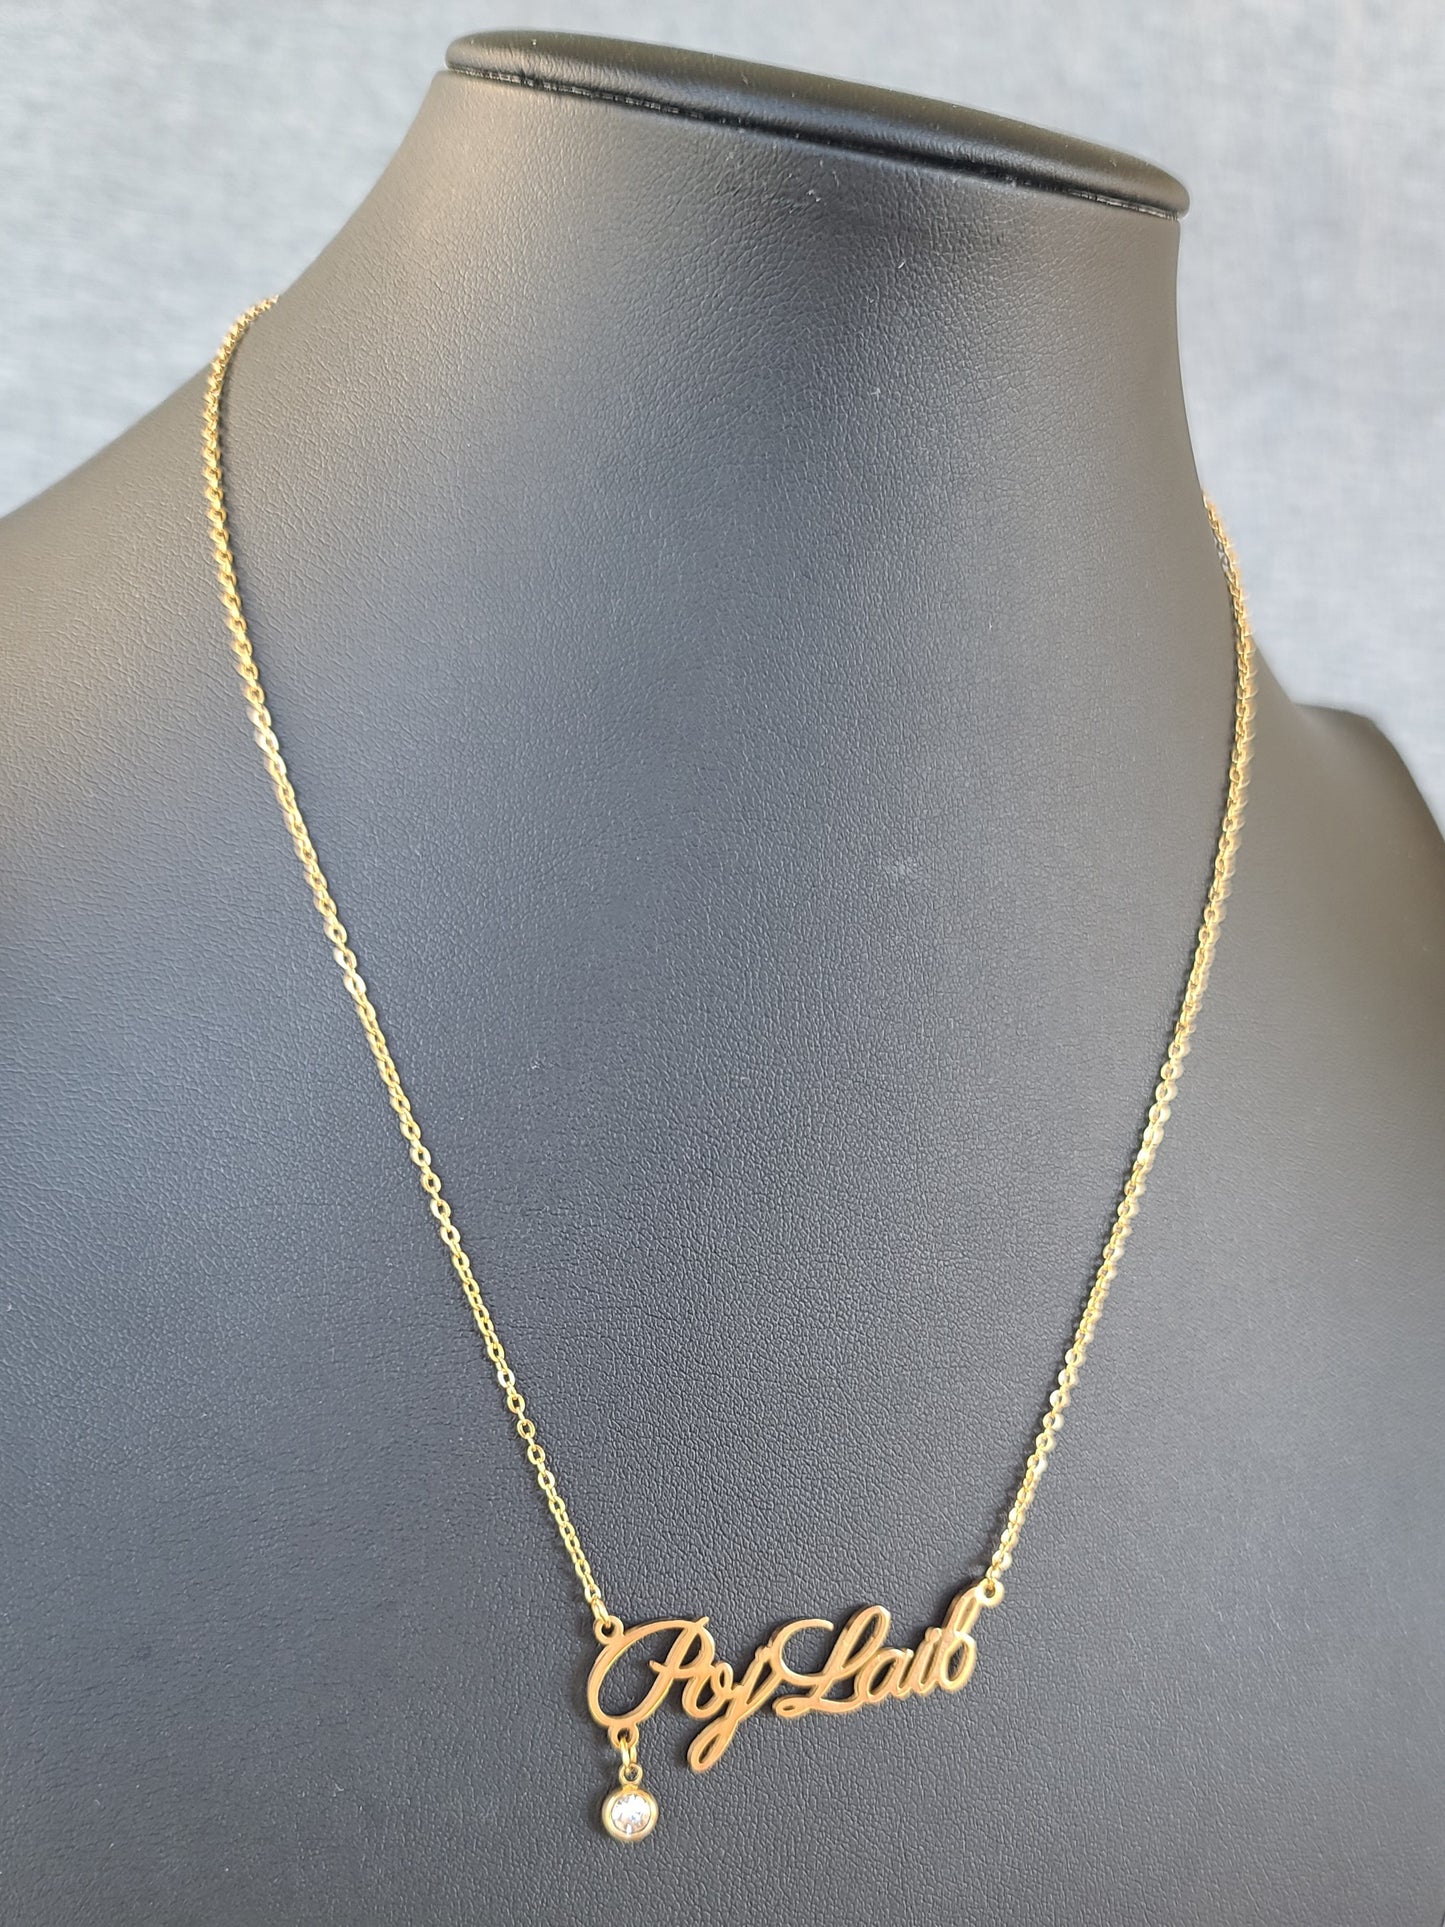 Poj Laib Necklace - 18K Gold Plated, Hypoallergenic